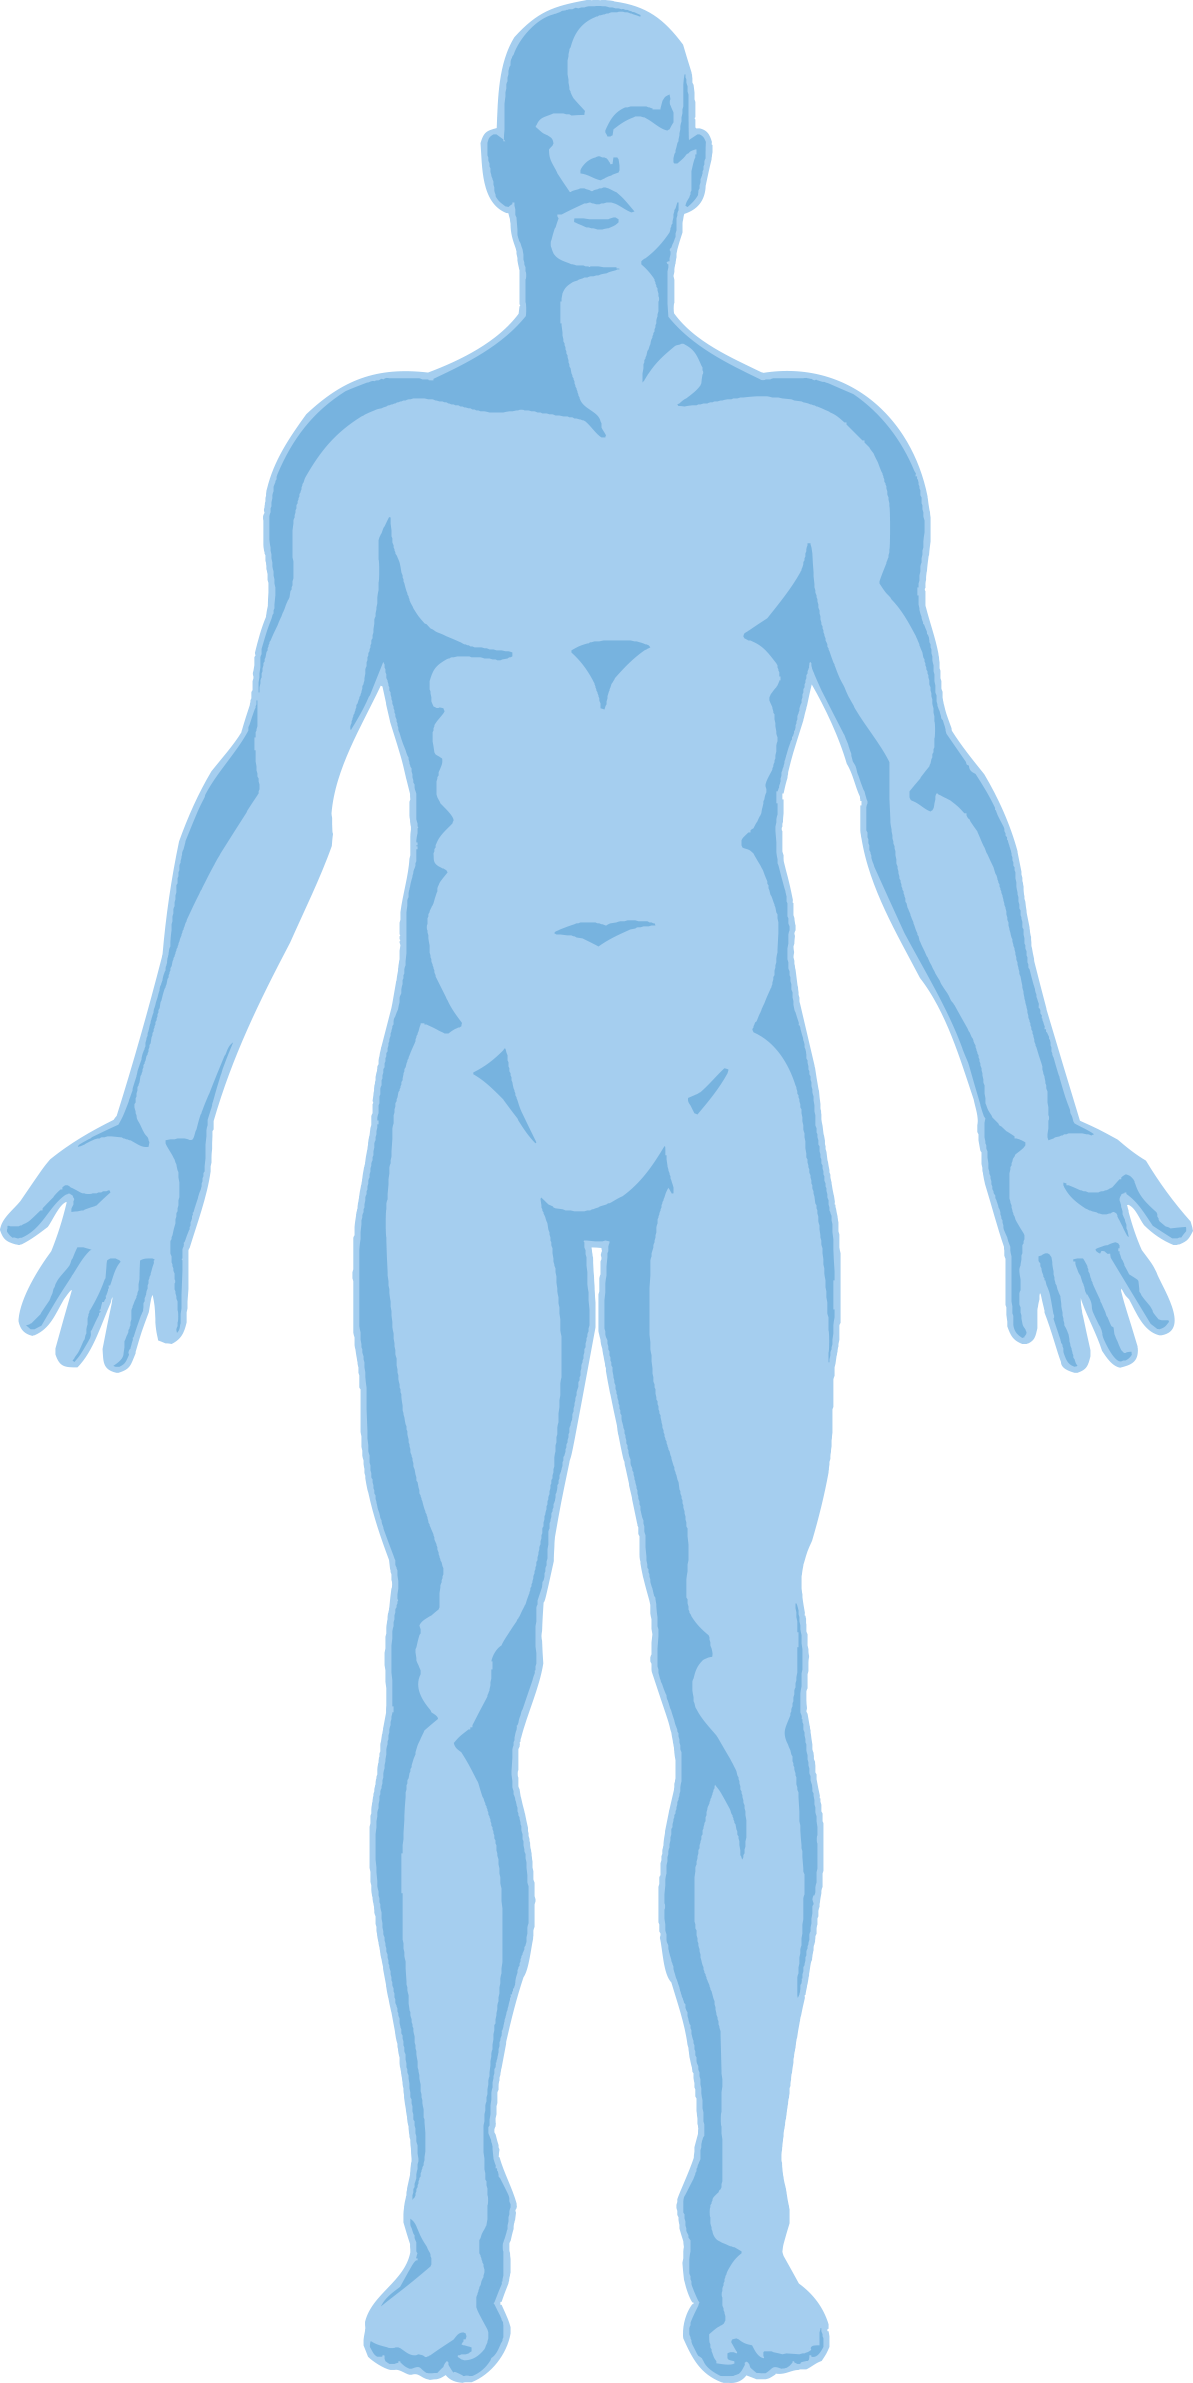 A Blue Human Body With Arms Spread Out